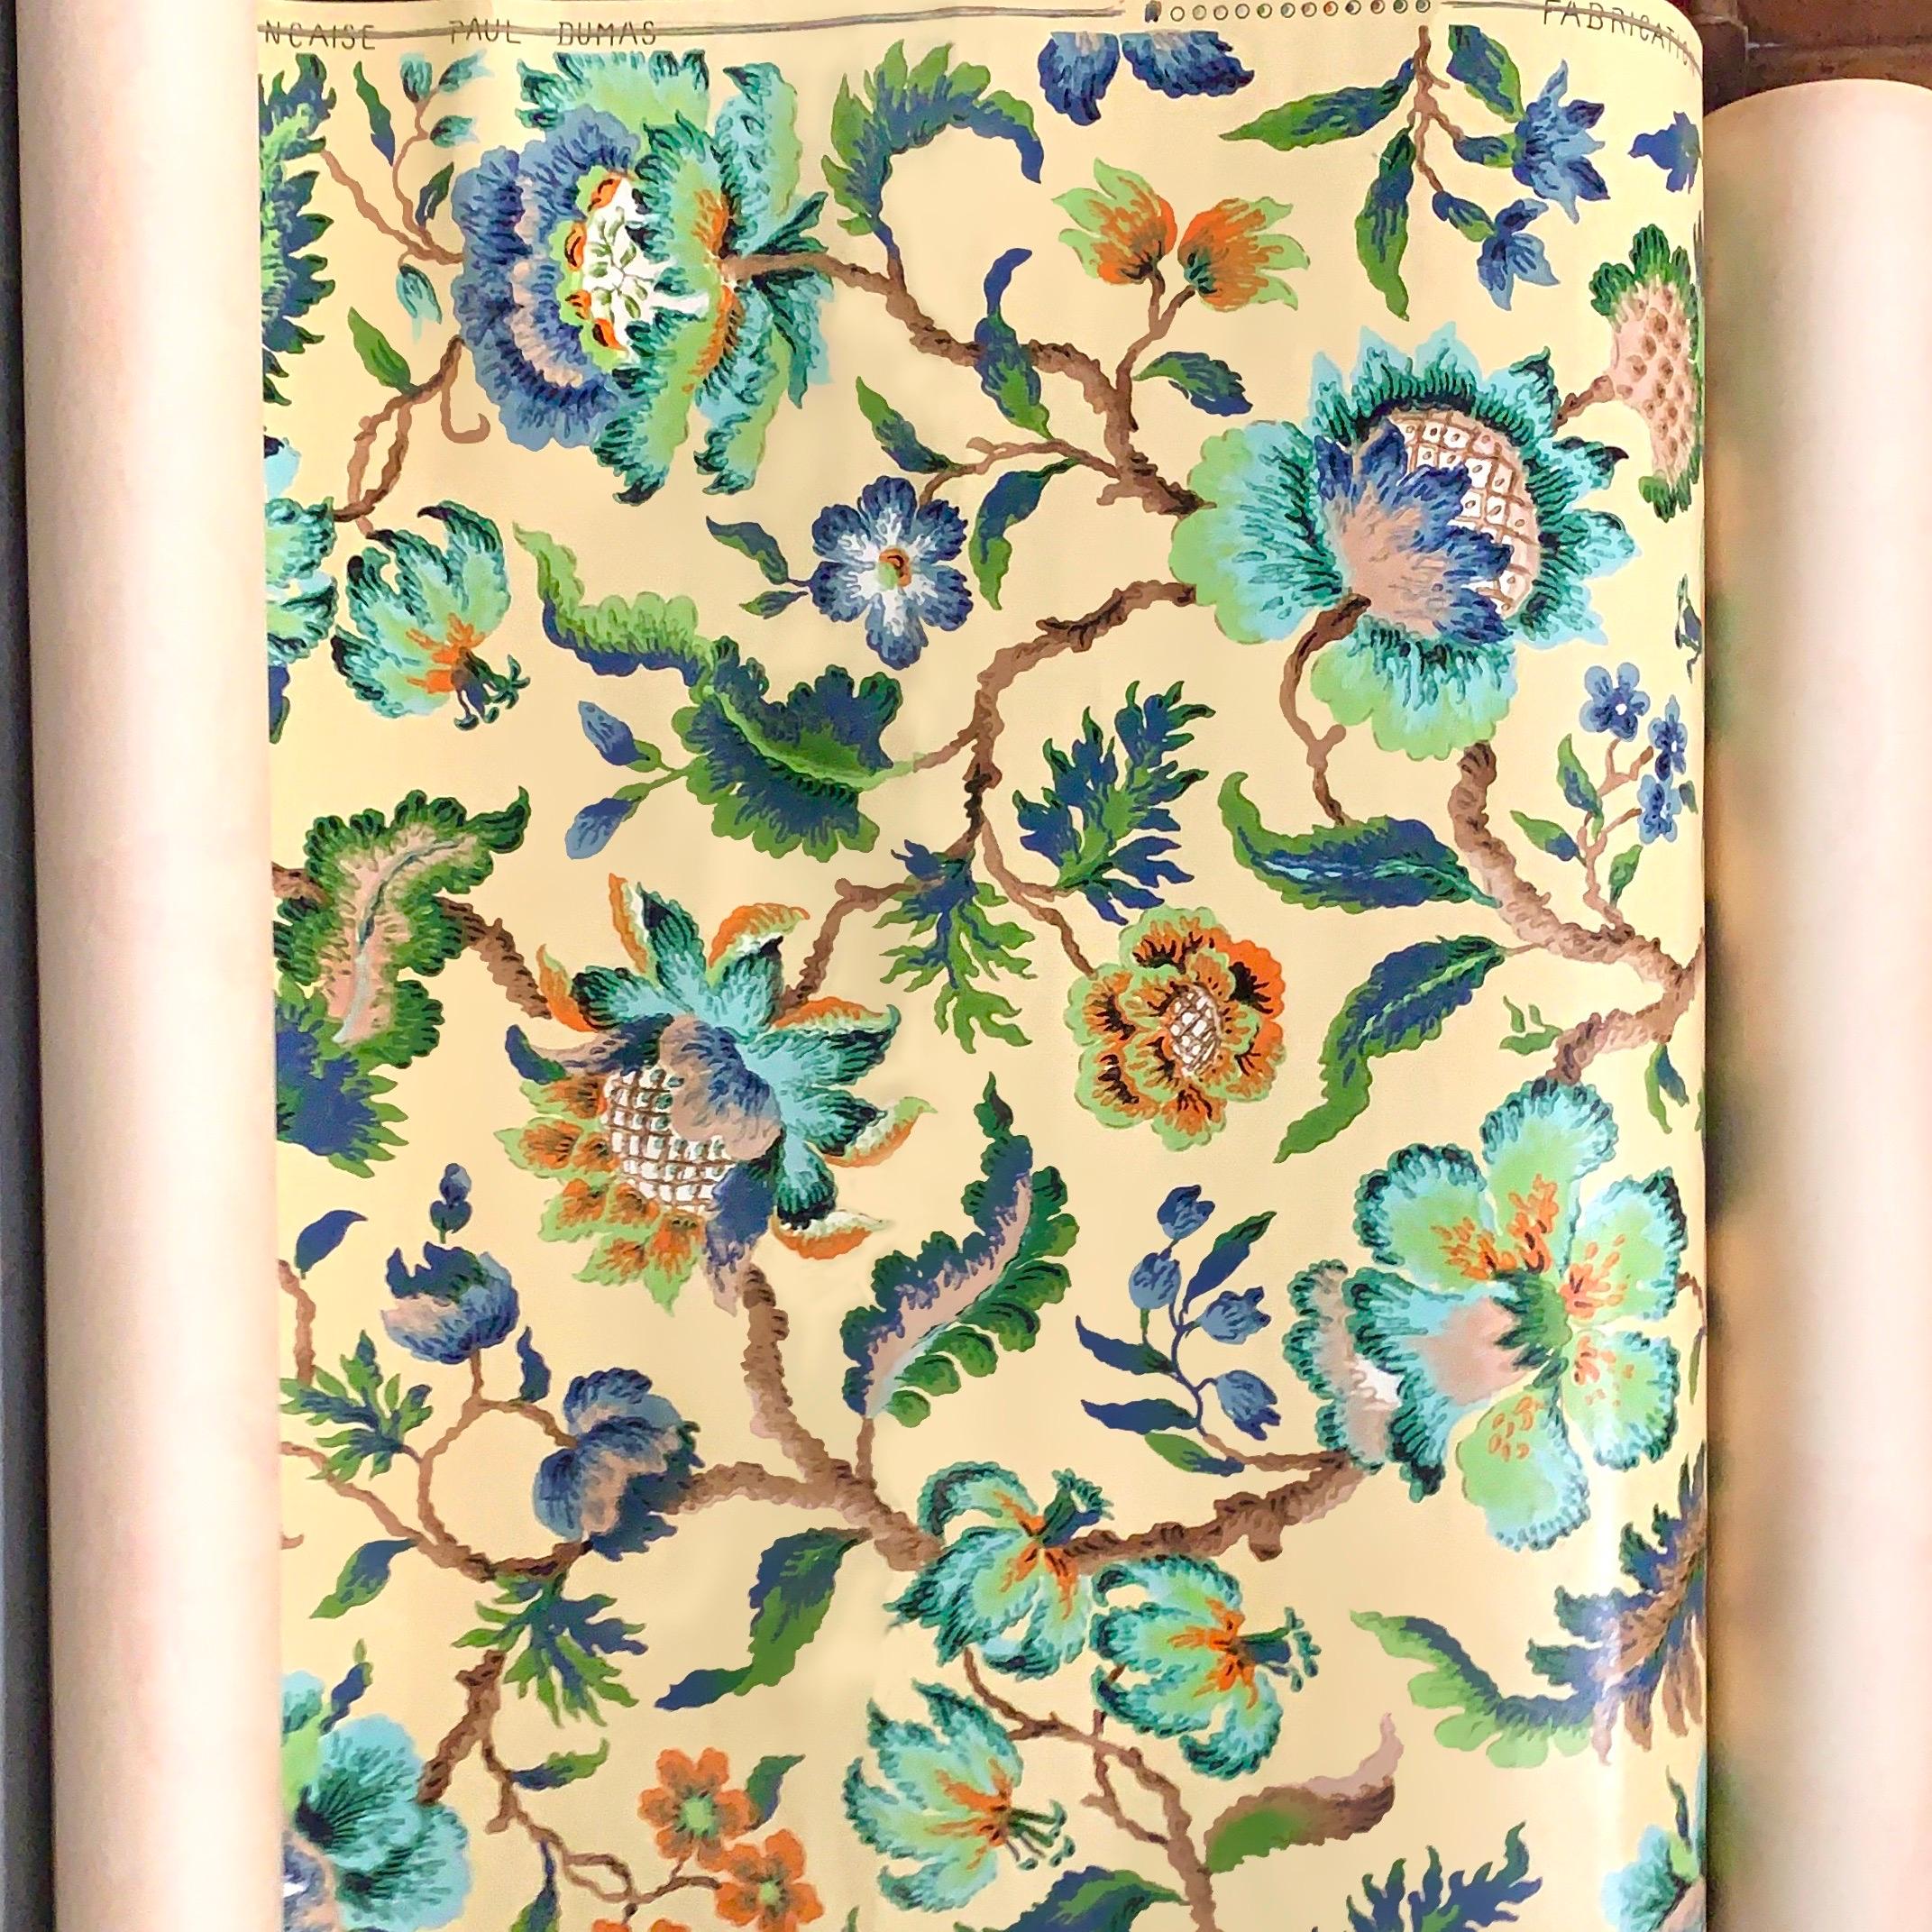 Antique French provincial Paul Dumas floral hand printed wallpaper, blue and cream, Jacobean  Deco pattern, circa 1920. Exceedingly rare. Over 10 continuous yards. 12-color print. This is an original Paul Dumas design and production. It is not a